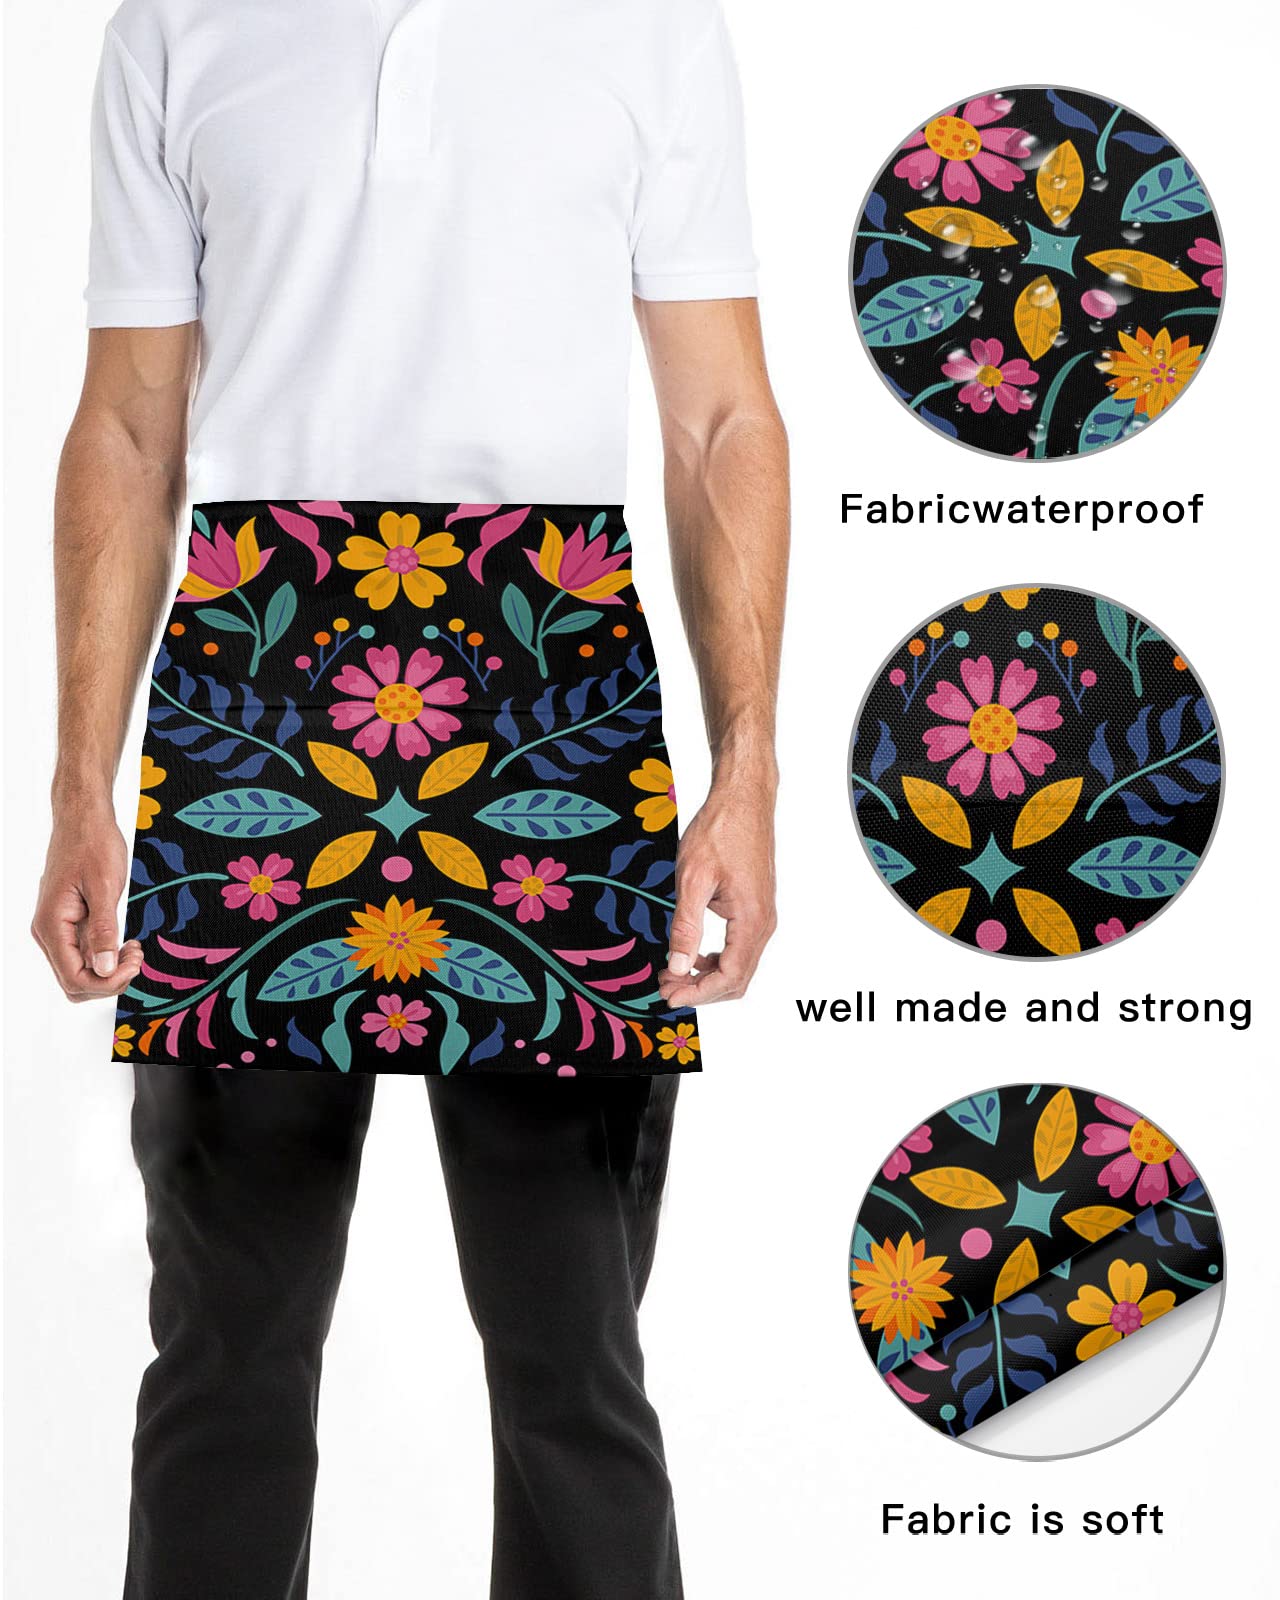 DecorLovee Mexican Colorful Floral Waitress Apron with 3 Pockets, Mexico Ethnic Classic Black Abstract Art Server Aprons Waterproof Kitchen Restaurant Half Waist Apron for Men Women